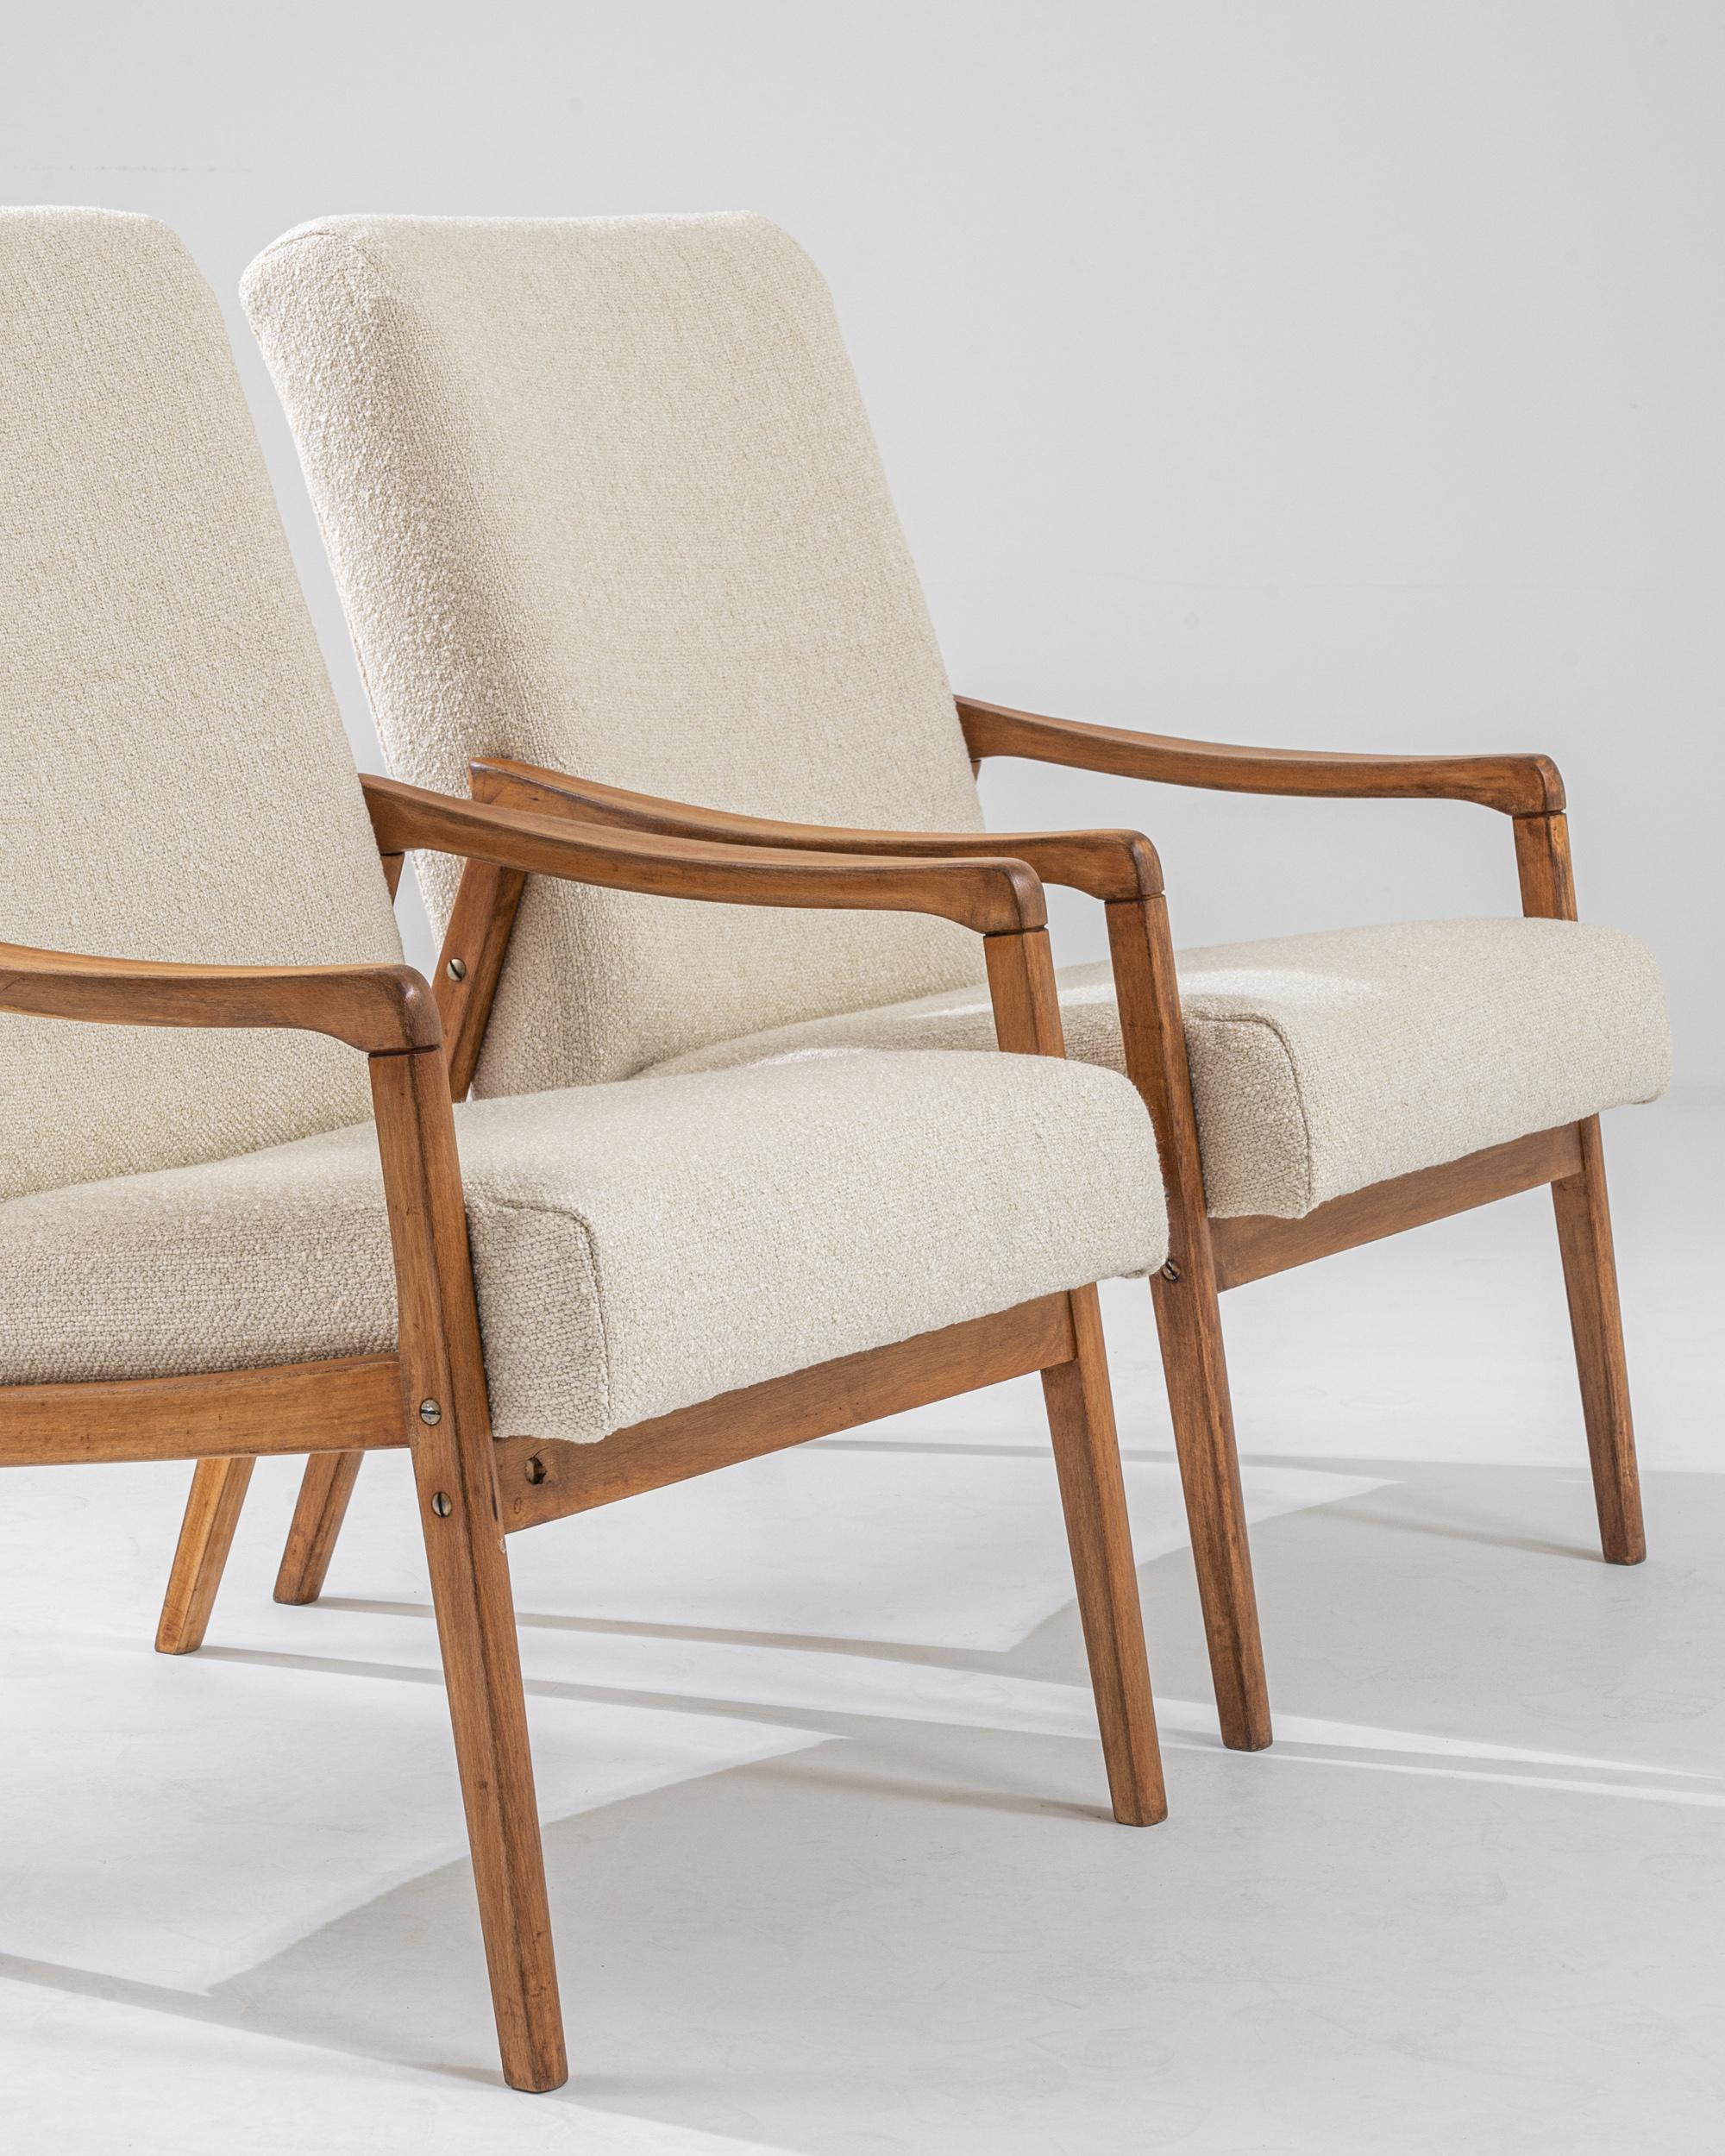 1960s Czechia Pair of Wooden Armchairs For Sale 4